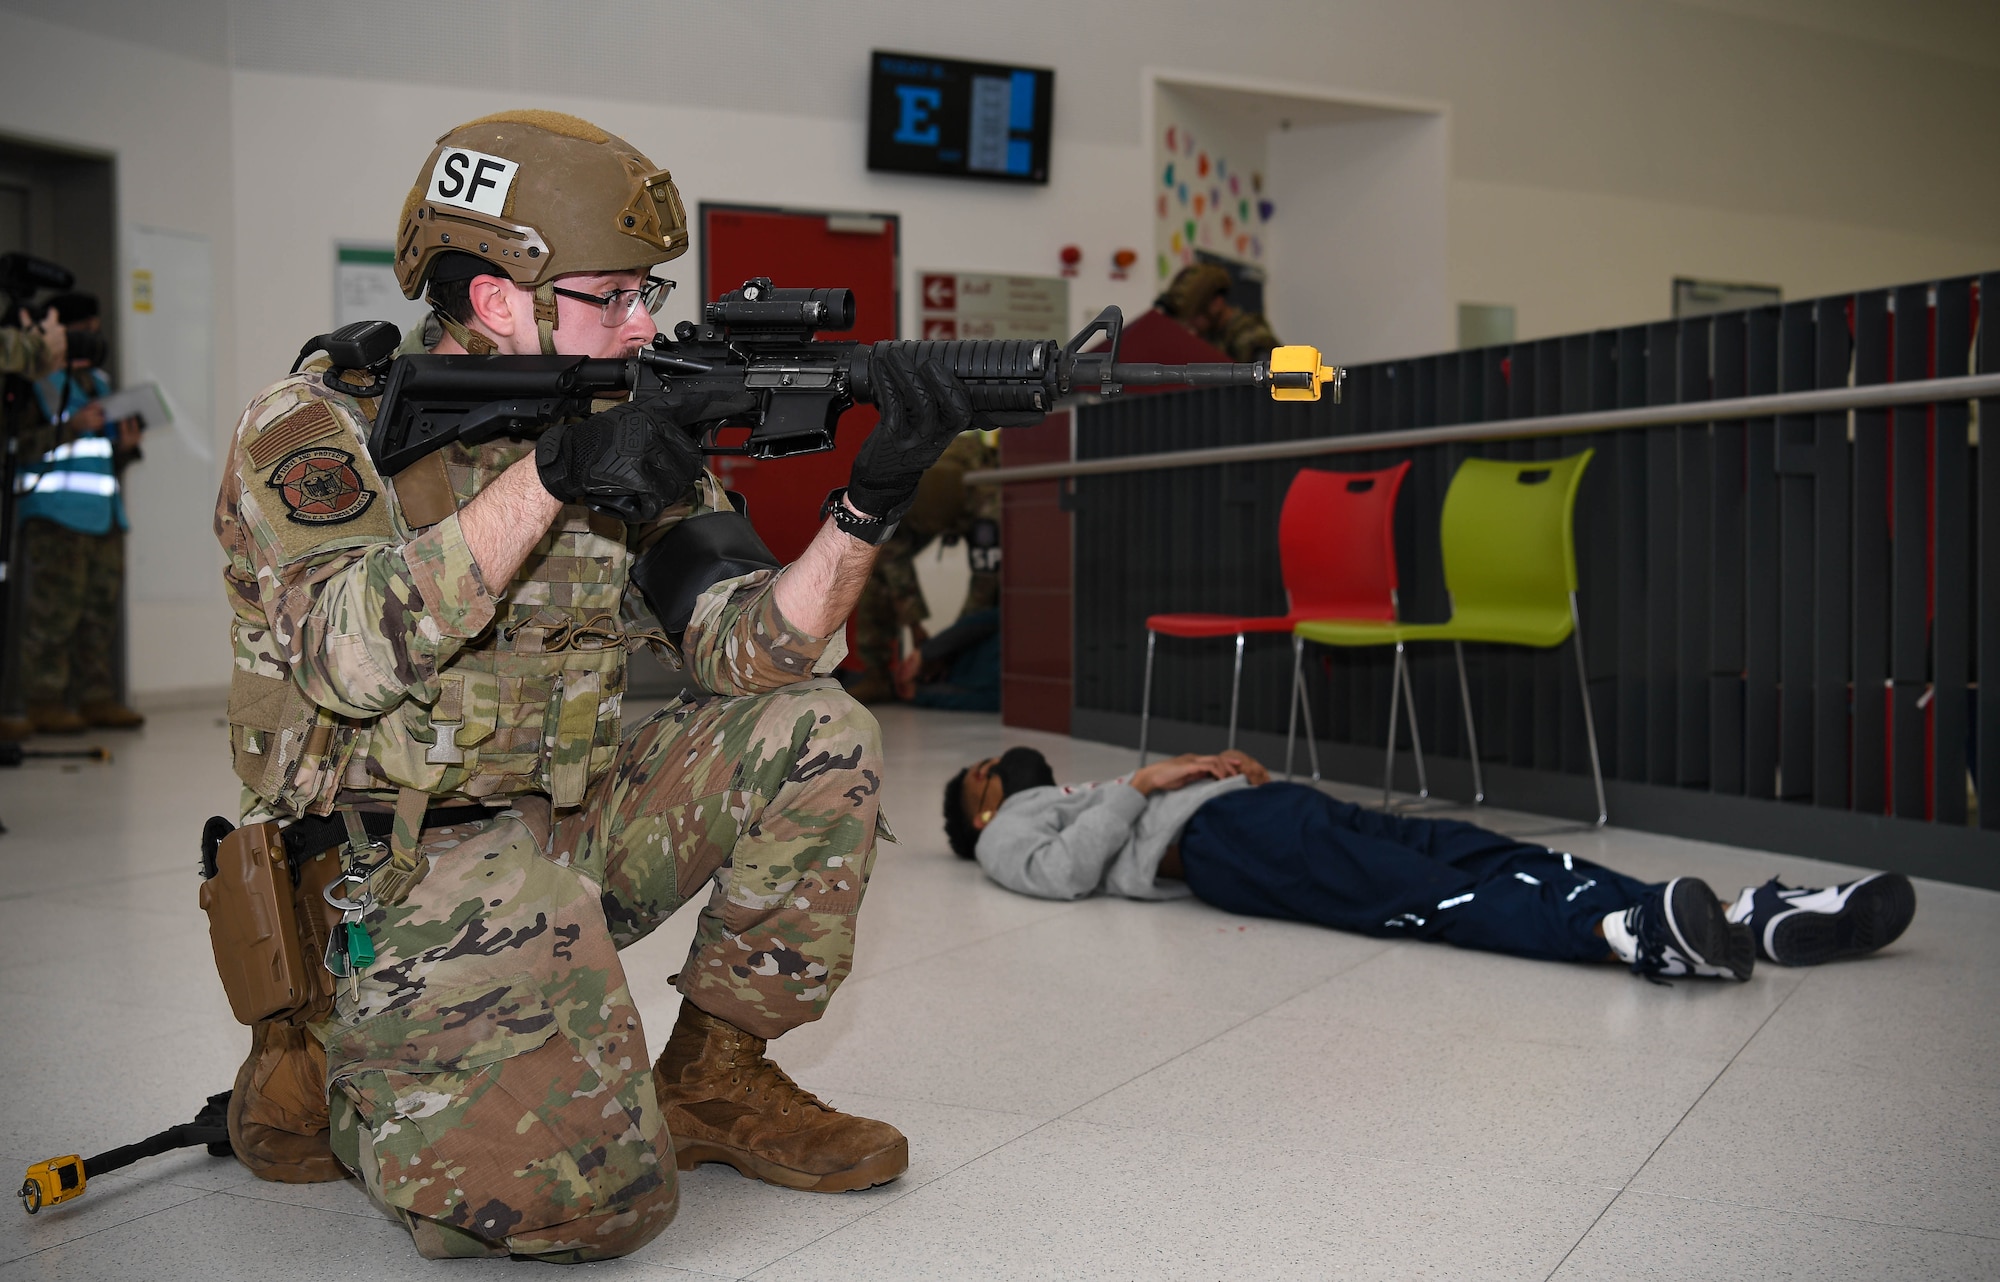 U.S. Air Force Senior Airman Willian Rhea, 569th United States Forces Police Squadron patrolman, neutralizes a simulated active shooter threat during exercise Operation Varsity 22-1 at Kaiserslautern High School at Vogelweh Air Base, Germany, March 1, 2022. Wing inspection team members followed Airmen from various groups to collect data on how they react to every situation they encounter and to take note on whether or not they followed proper procedures. (U.S. Air Force photo by Airman 1st Class Jared Lovett)